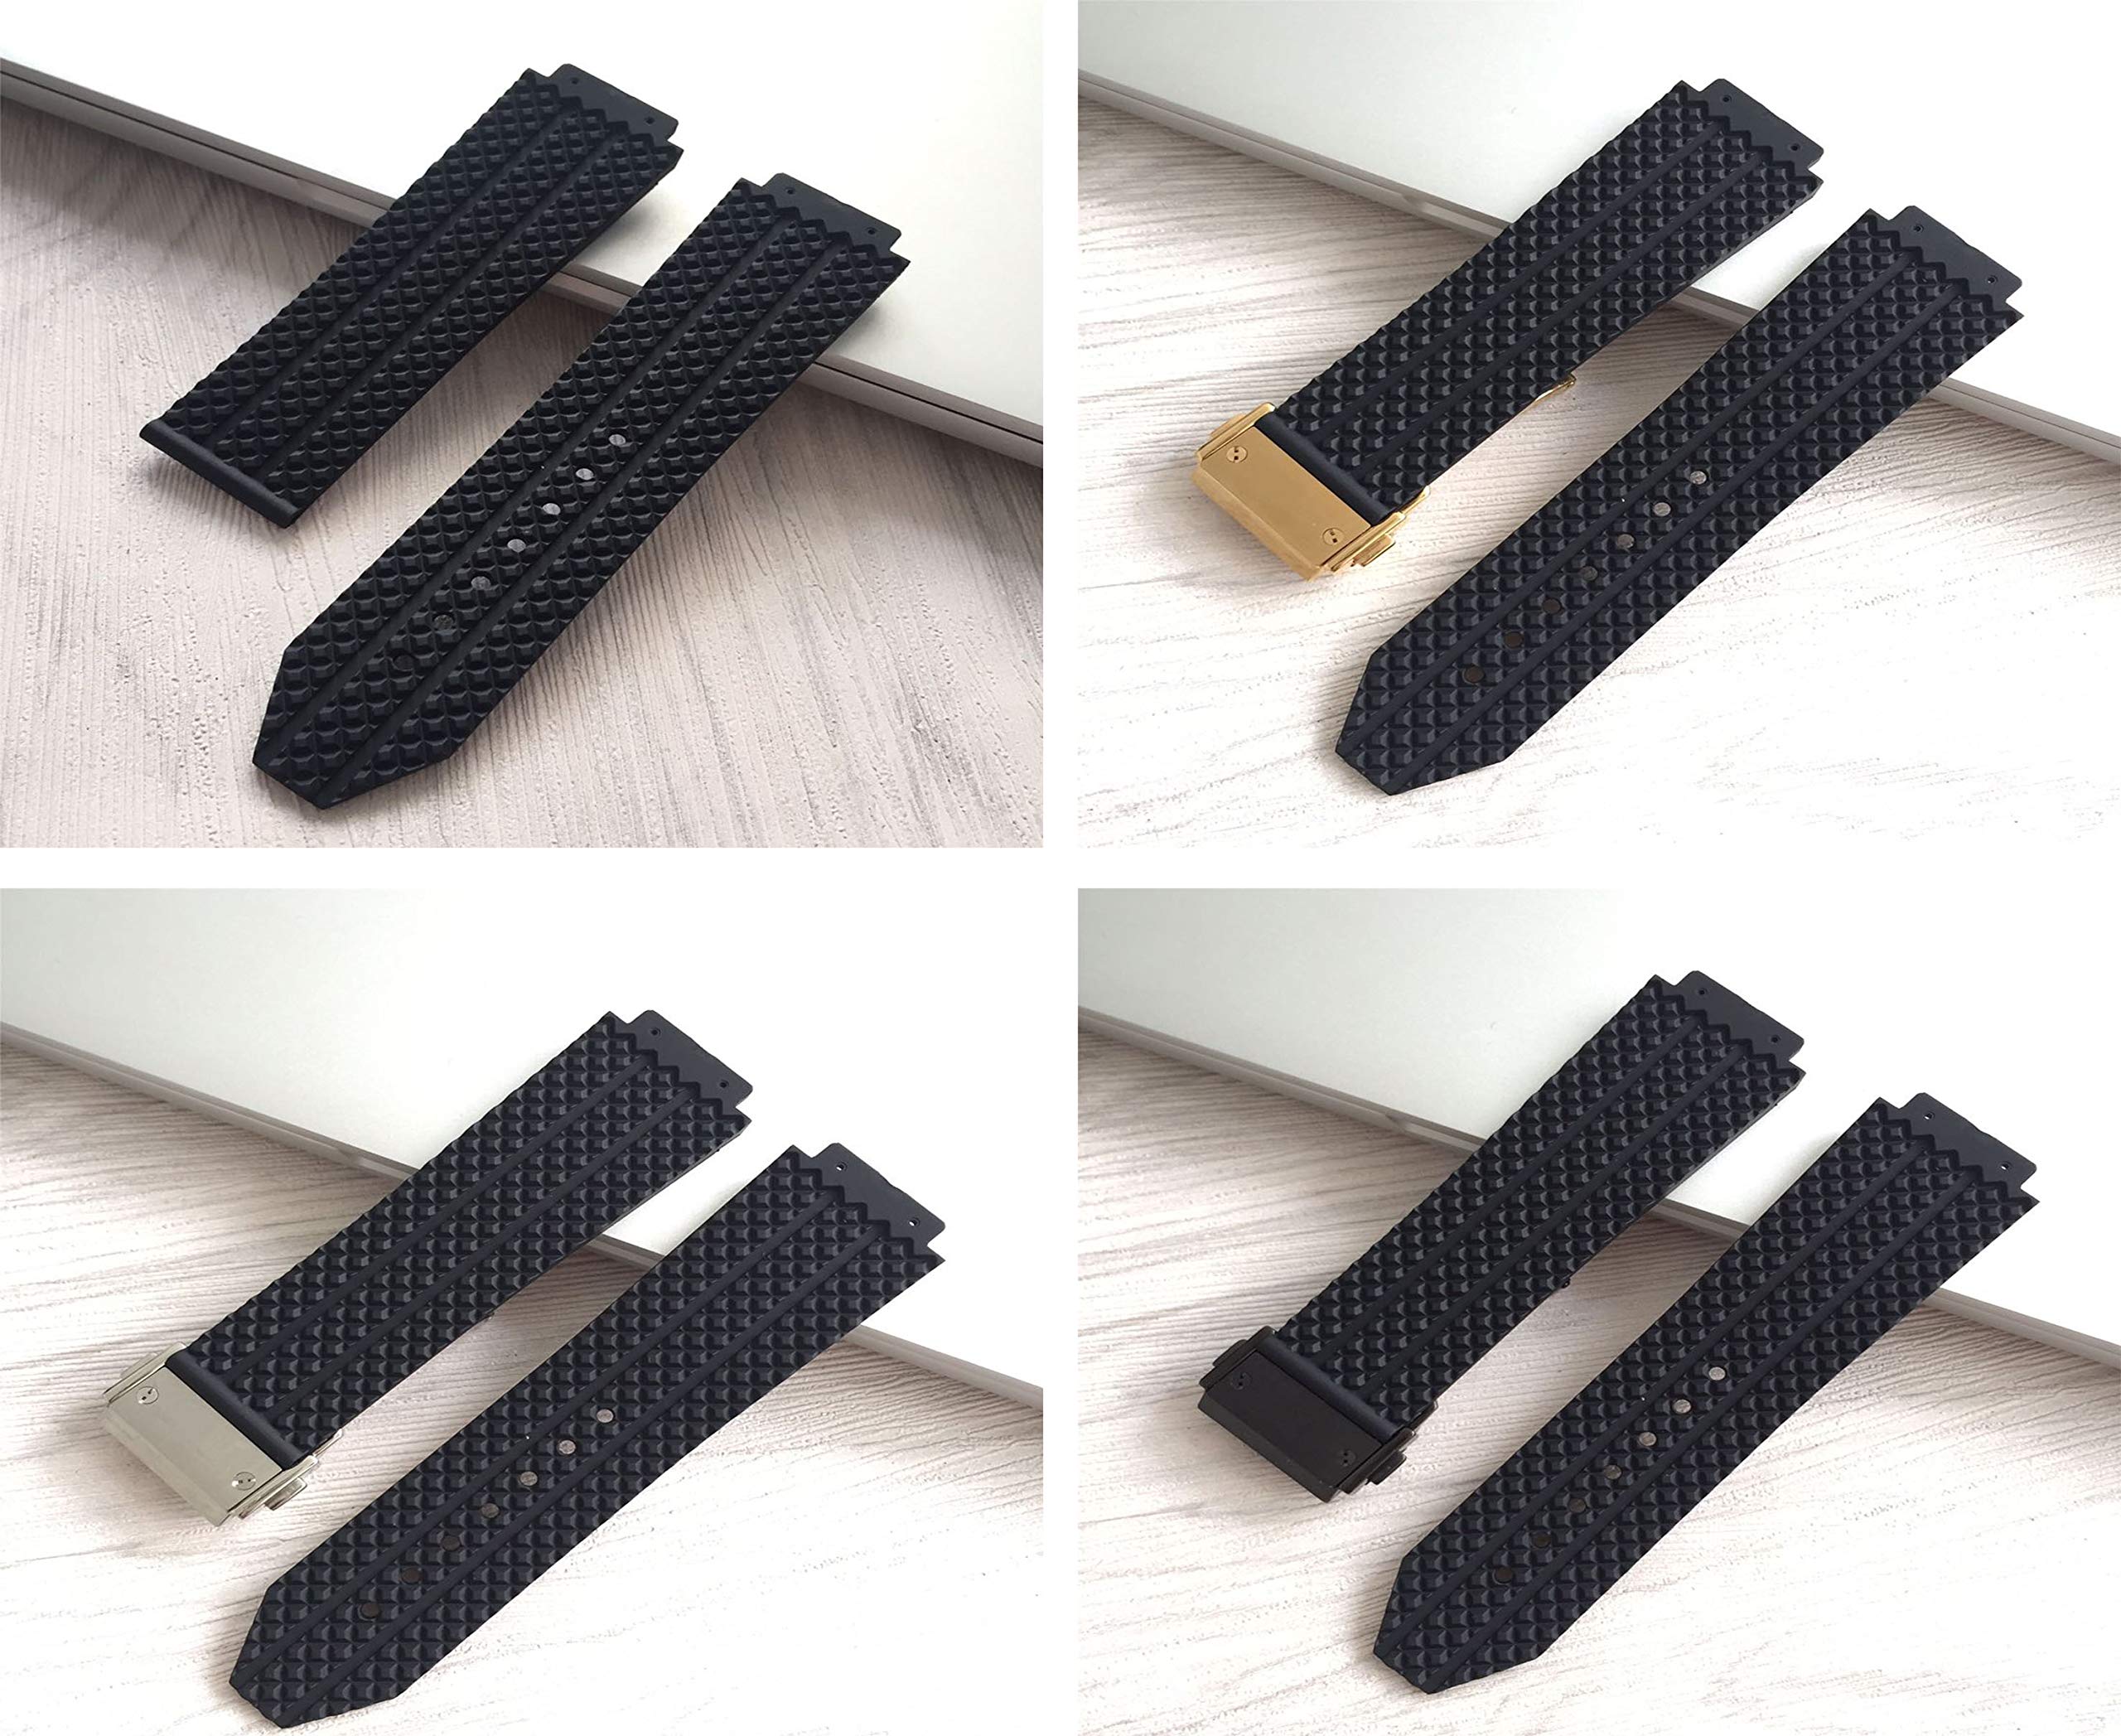 KAMIU 19mm 21mm 25mm Rubber Watch Strap with Replacement Band Tool for Hublot Big Bang